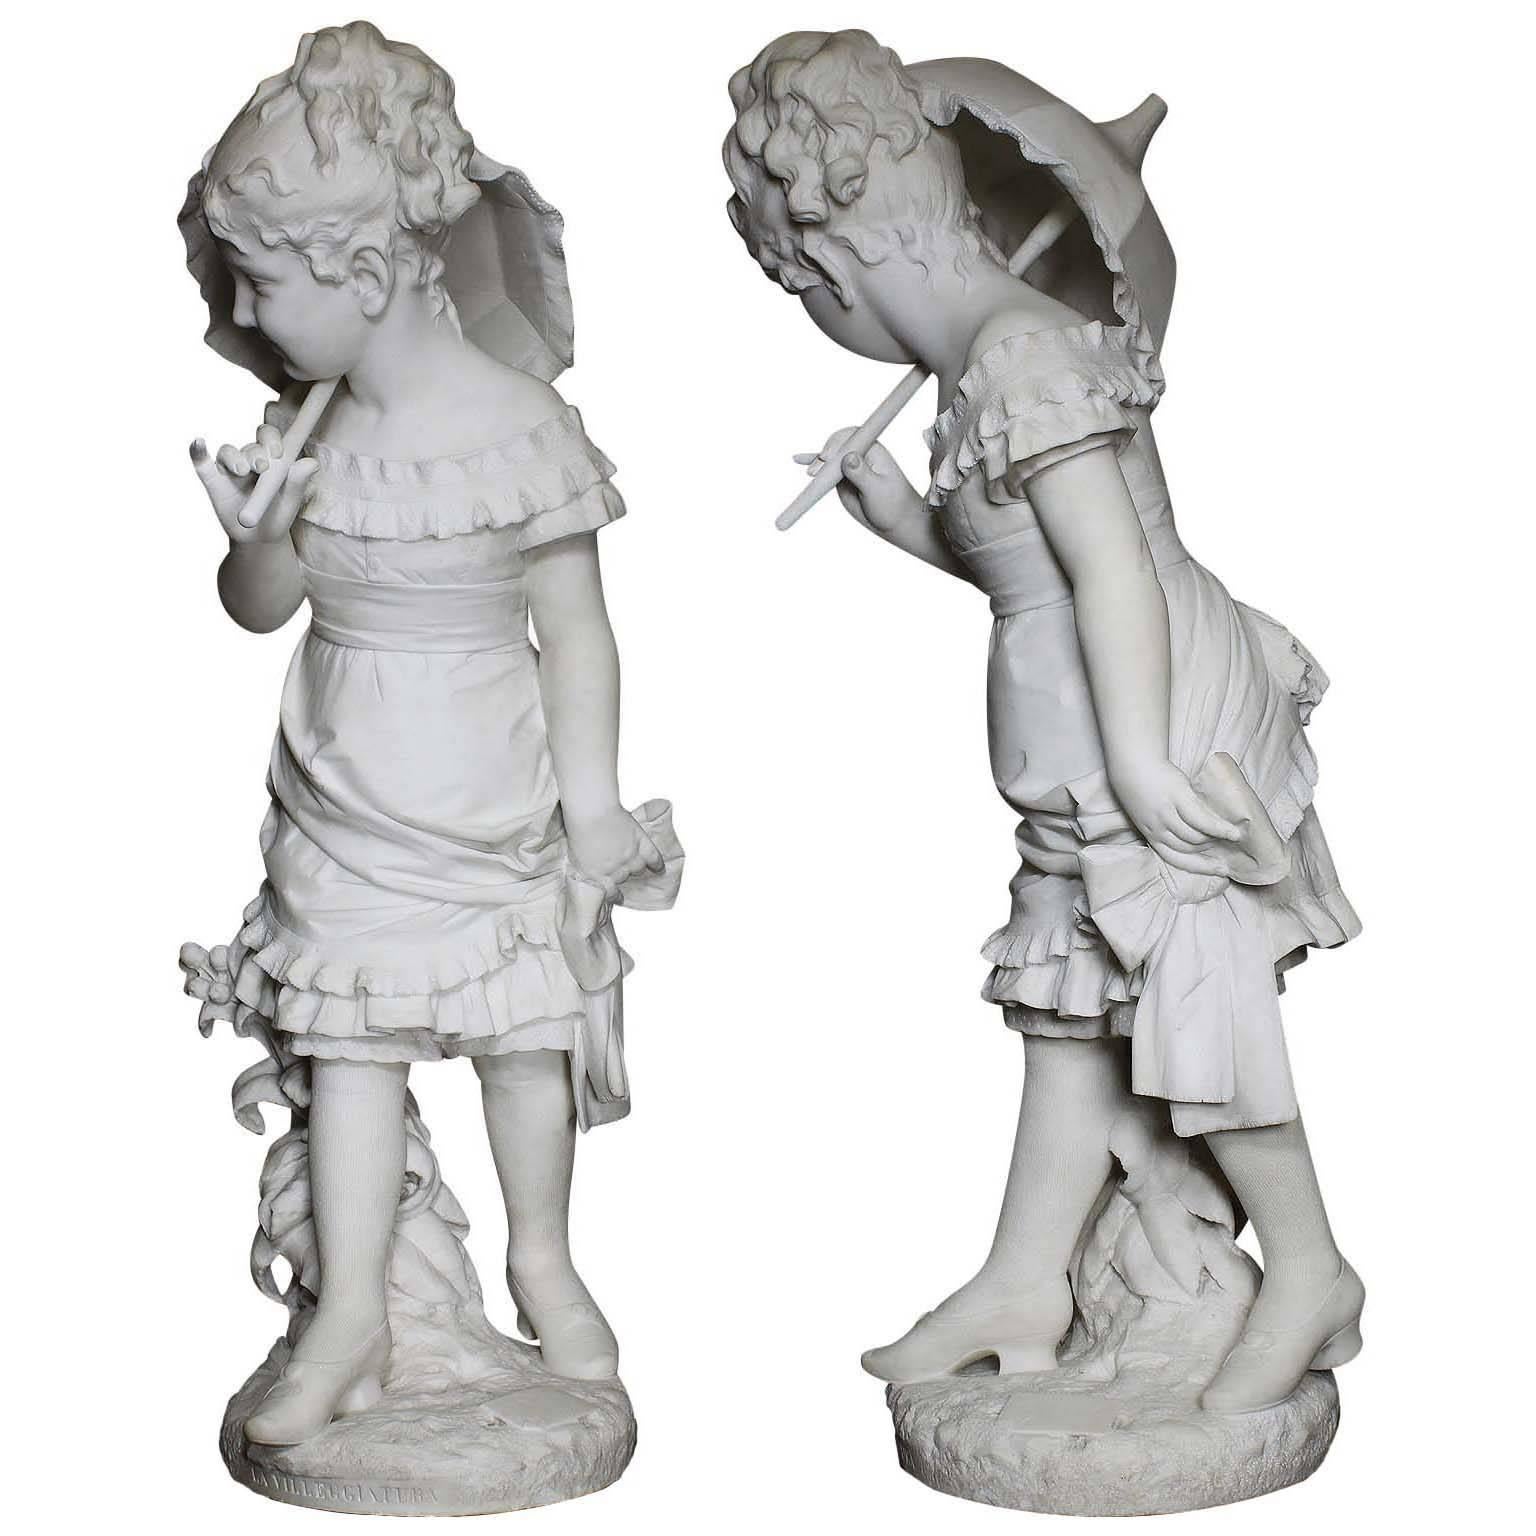 A very charming and finely carved Italian 19th century Carrara marble figure titled 